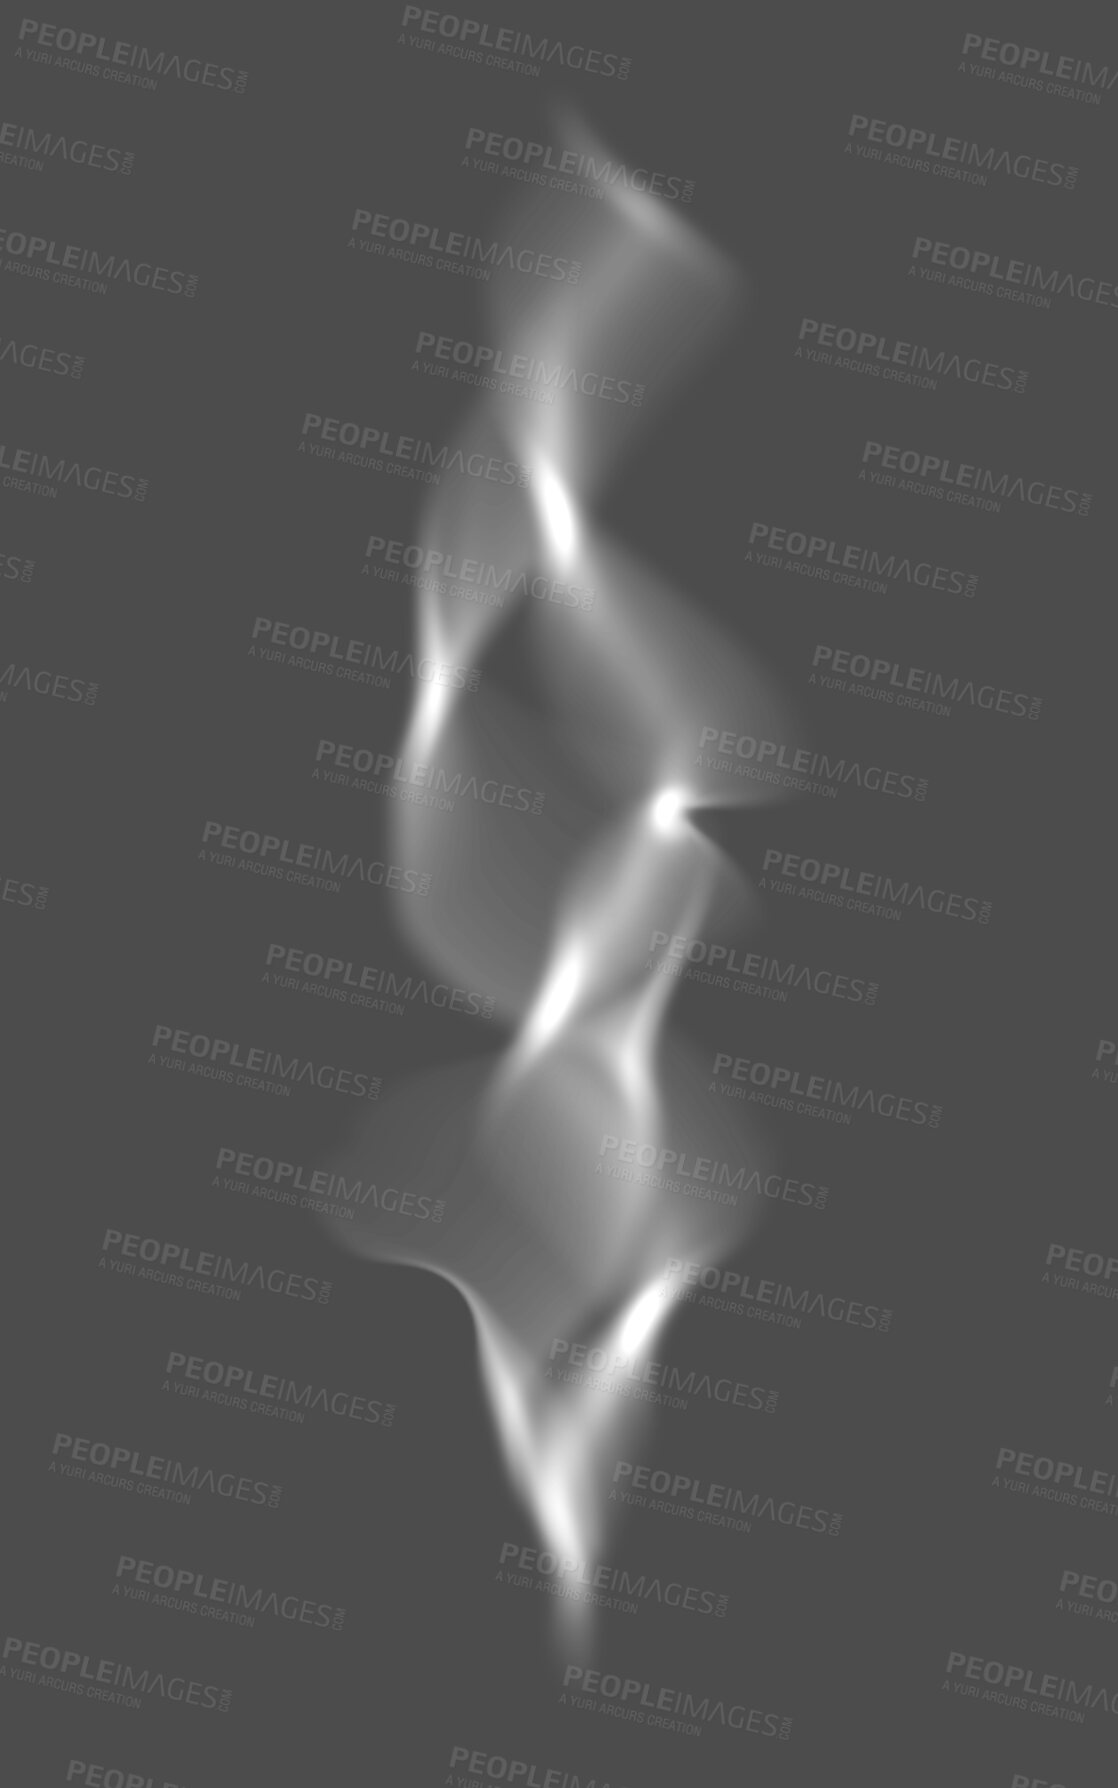 Buy stock photo White, smoke with mist or fog isolated on png or transparent background with cloud and vapor. Abstract, steam texture and smoking with misty swirl or curve, smog and smokey plume with fumes